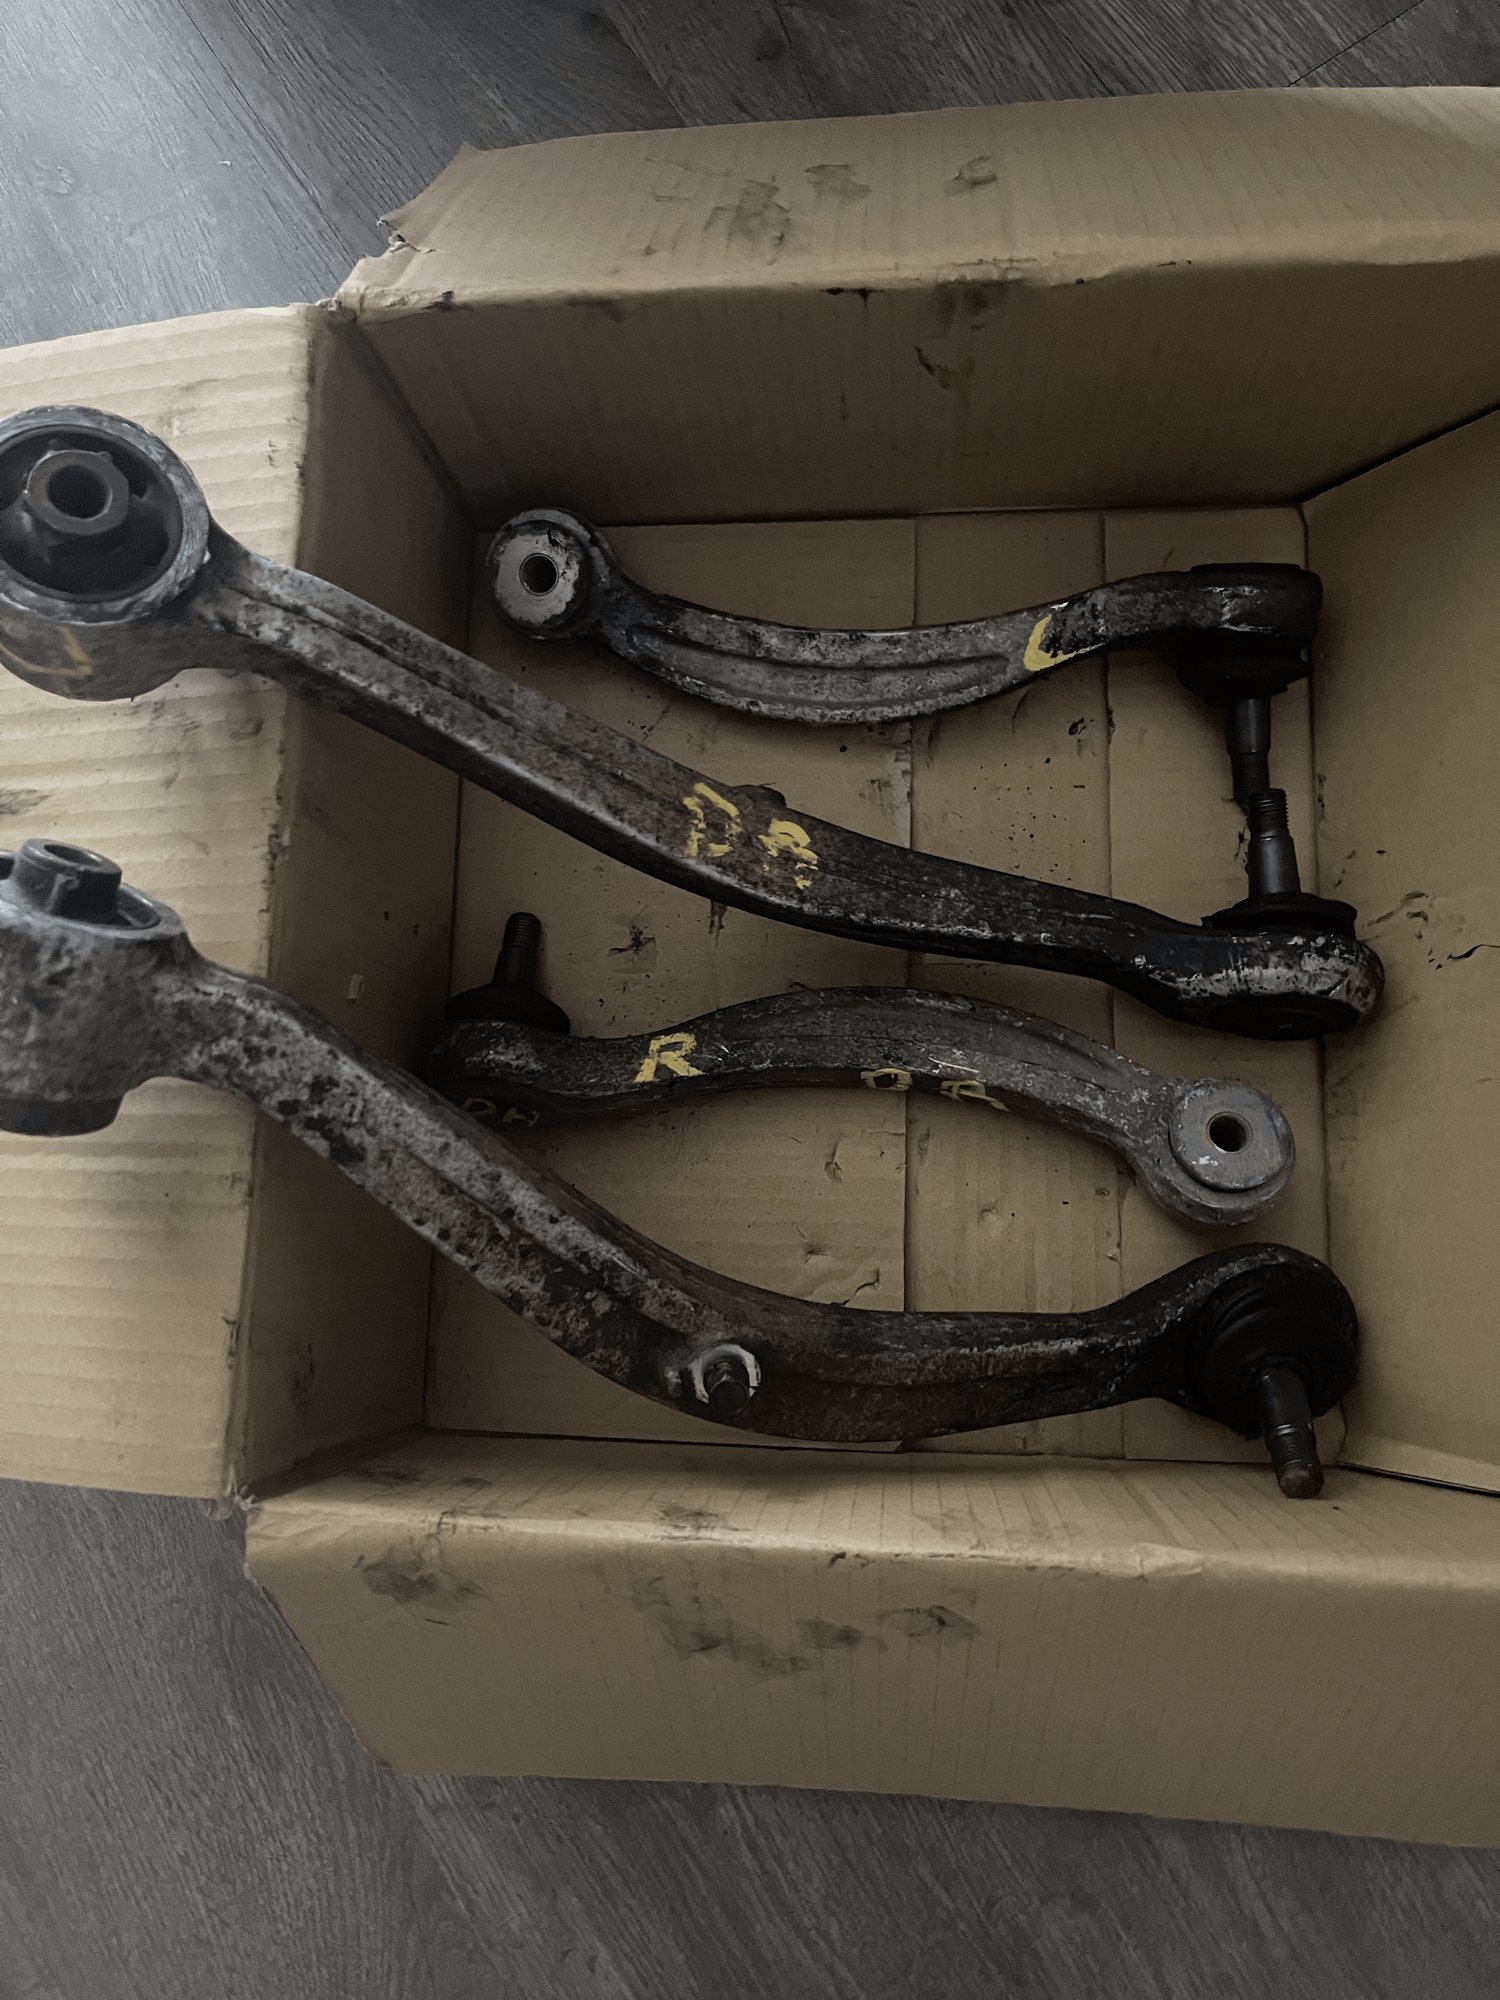 Miscellaneous - Evo VII OEM Parts - ECU, AC Comp, Suspension Arms, Steering Rack,... - Used - All Years  All Models - Charlotte, NC 28204, United States